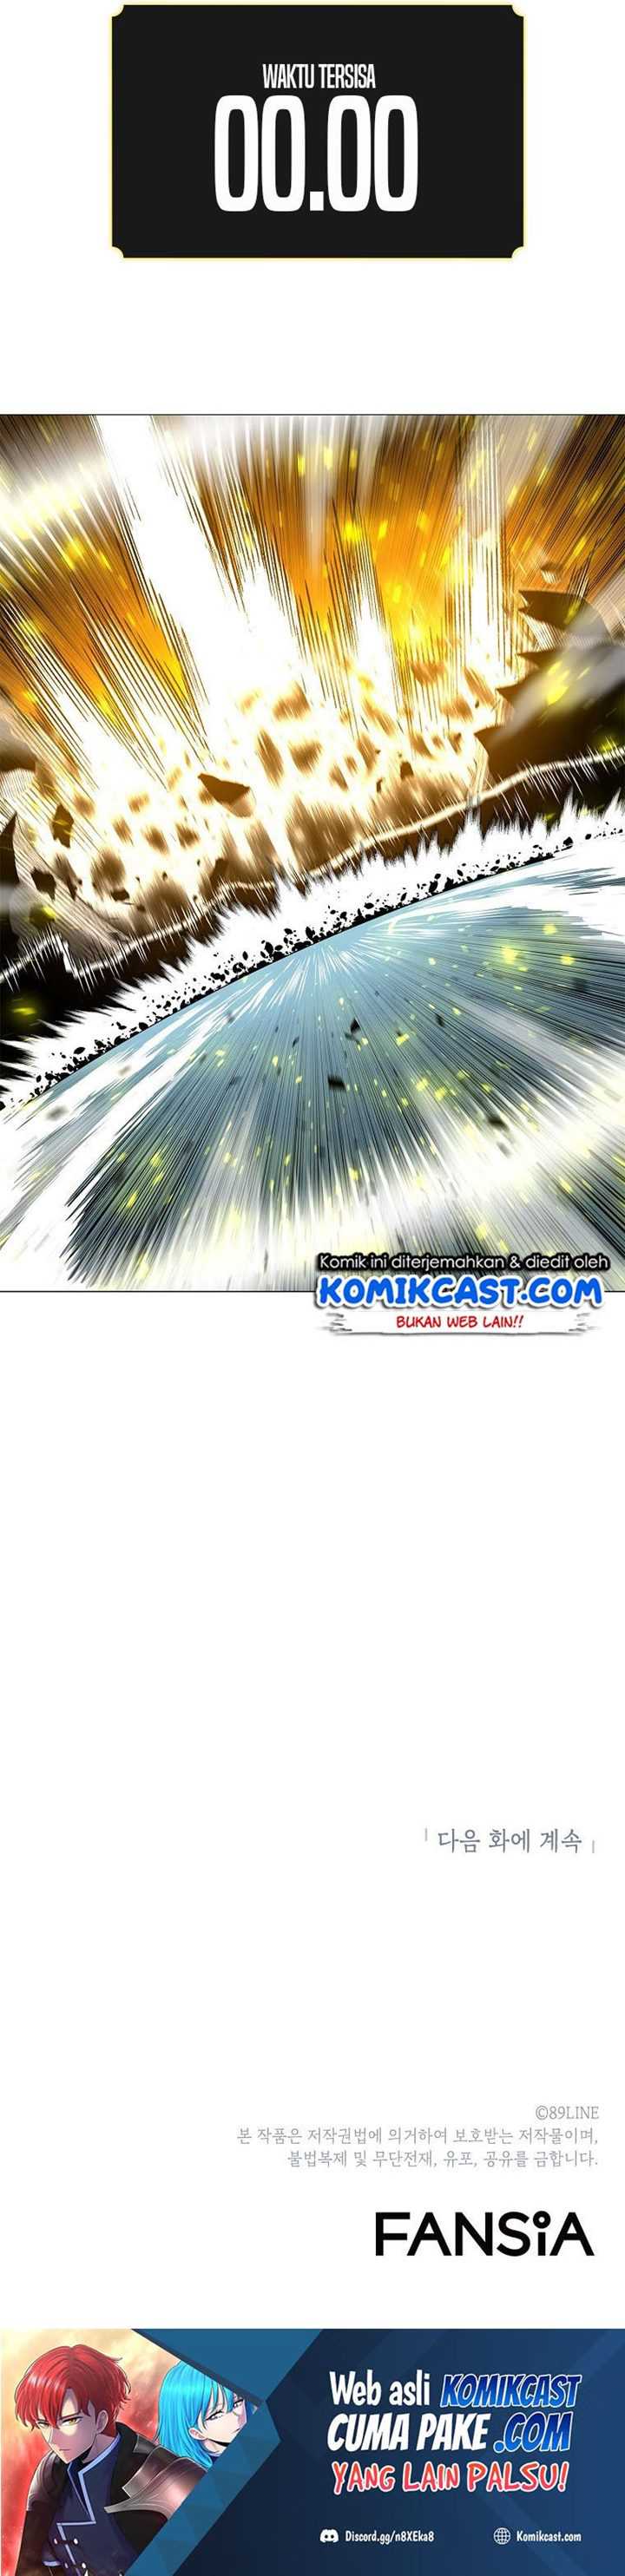 Updater Chapter 78